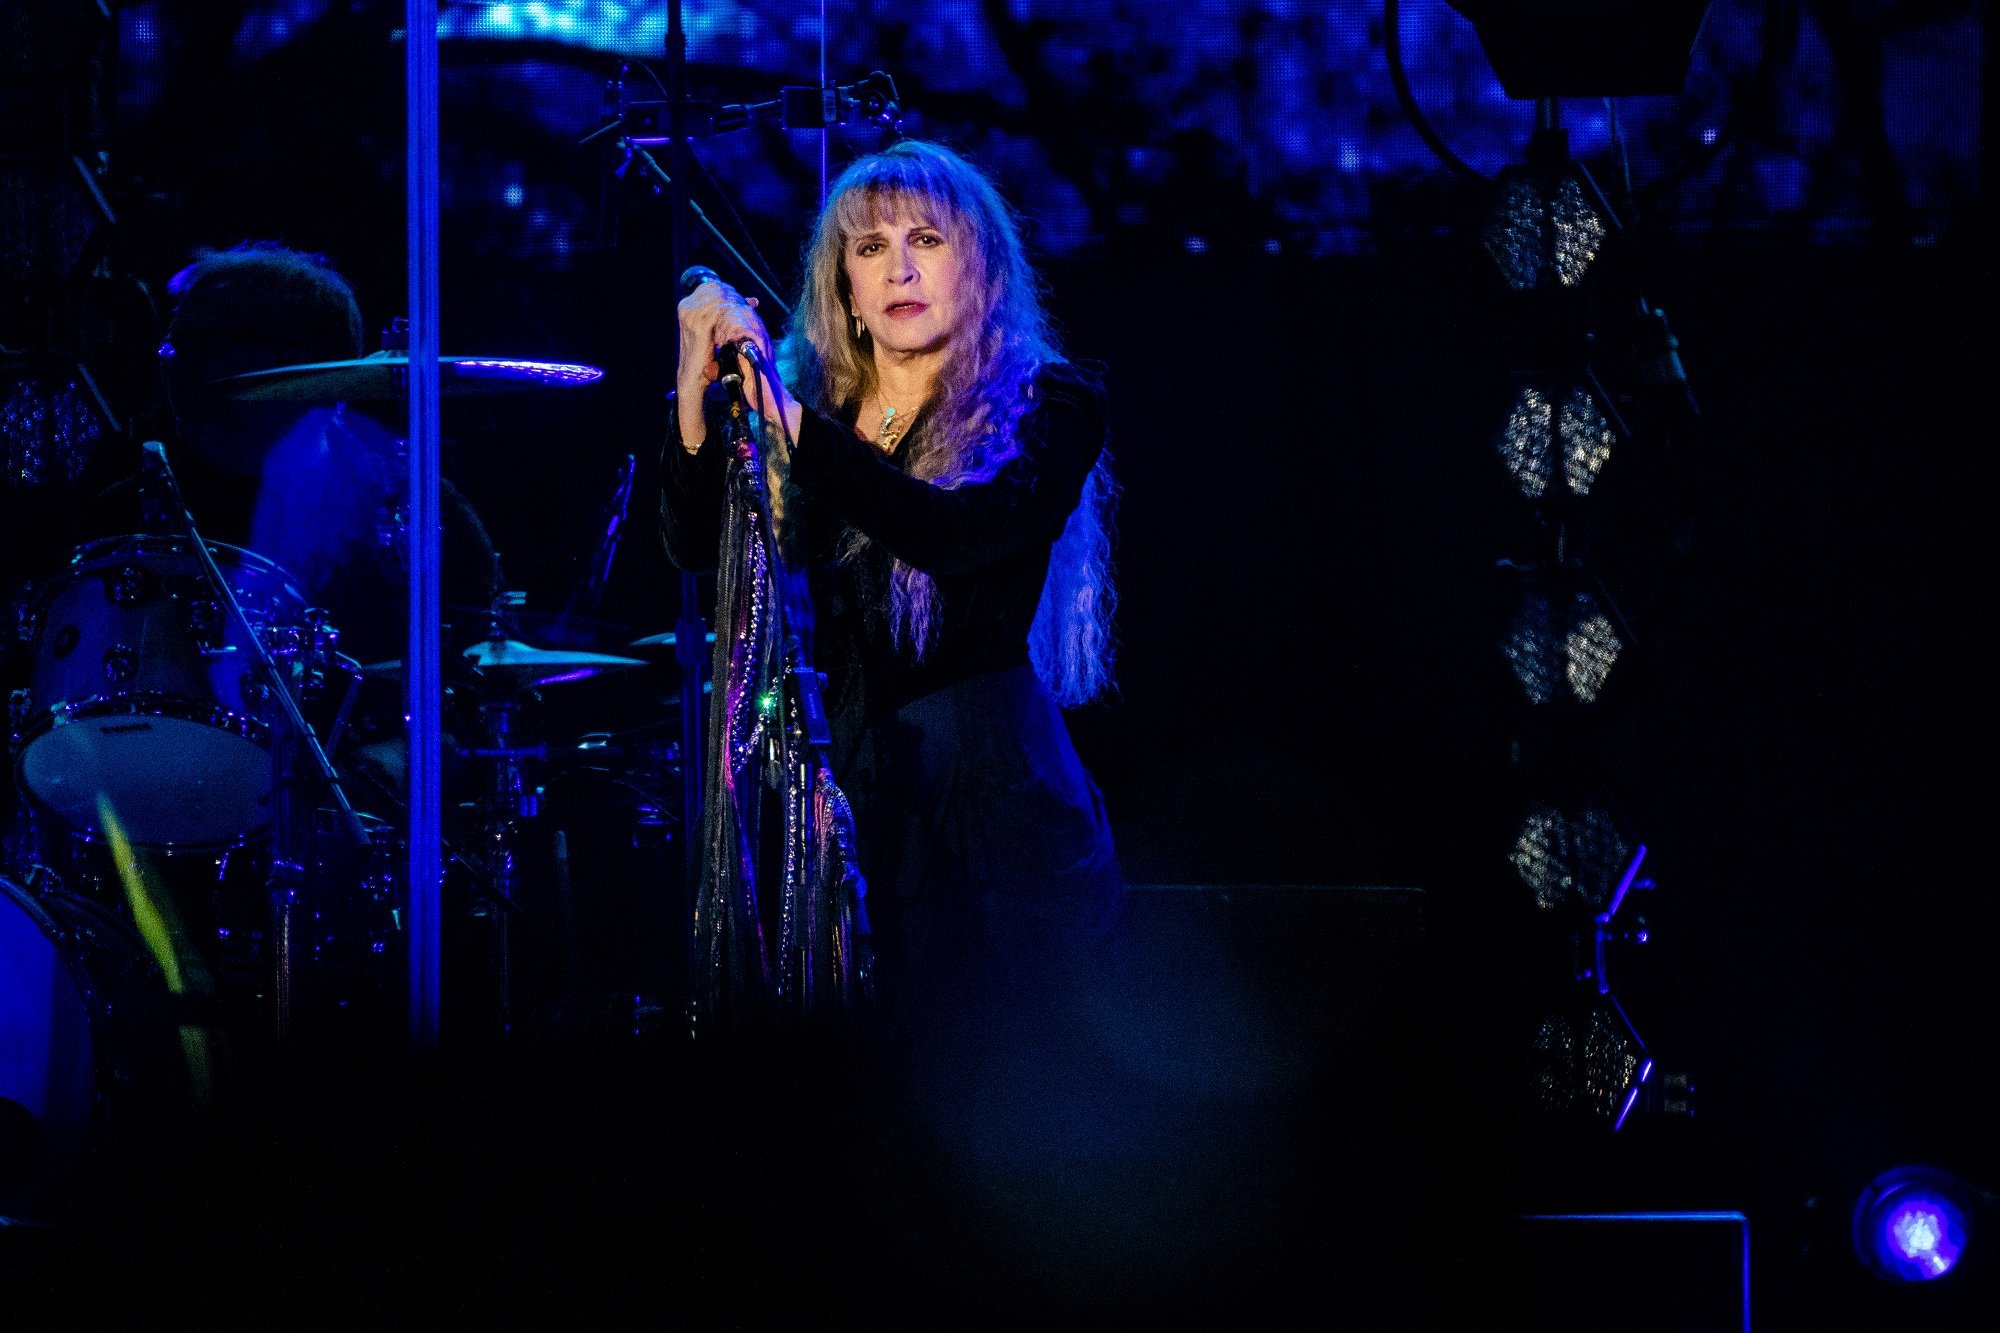 Stevie Nicks holds a microphone stand on stage